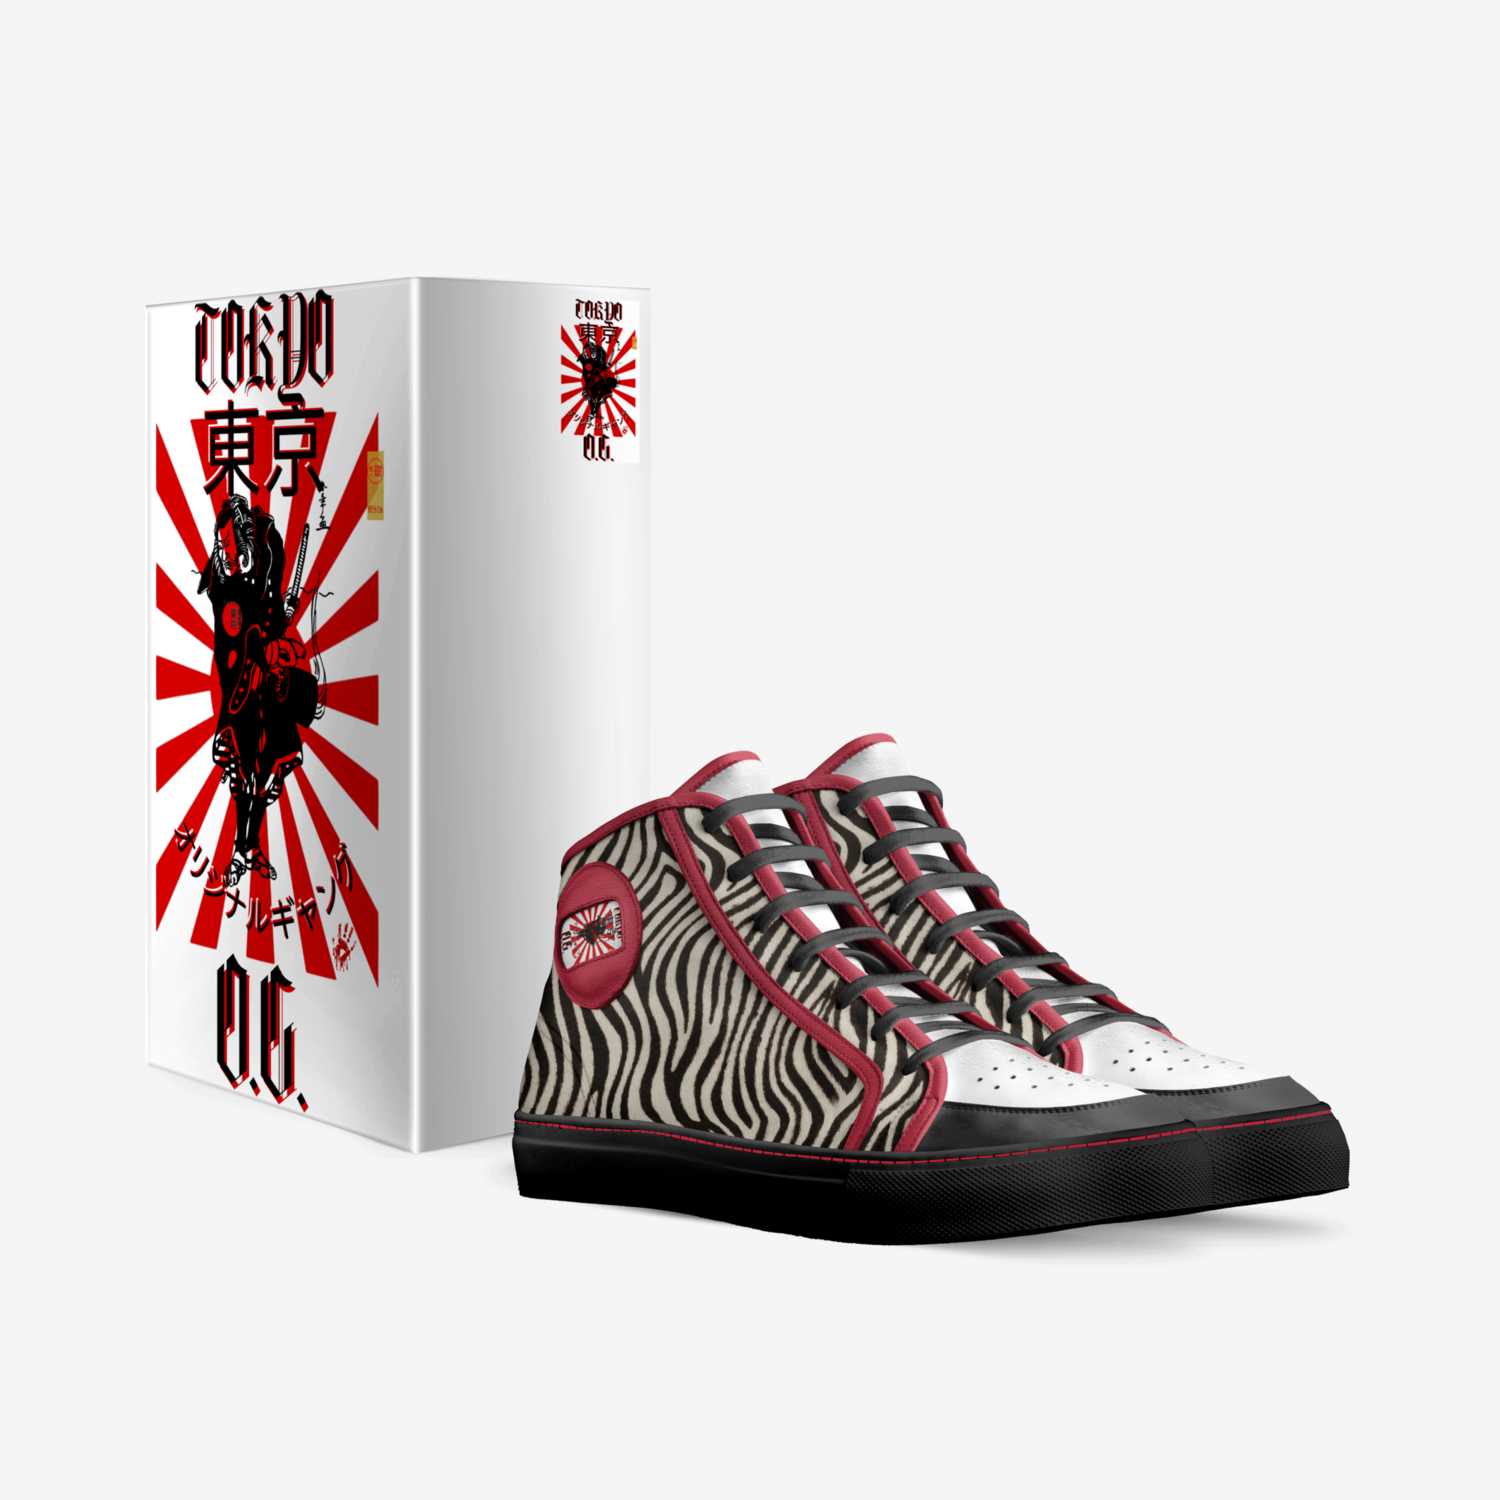 TOKYO O.G. custom made in Italy shoes by Kevin Marron | Box view